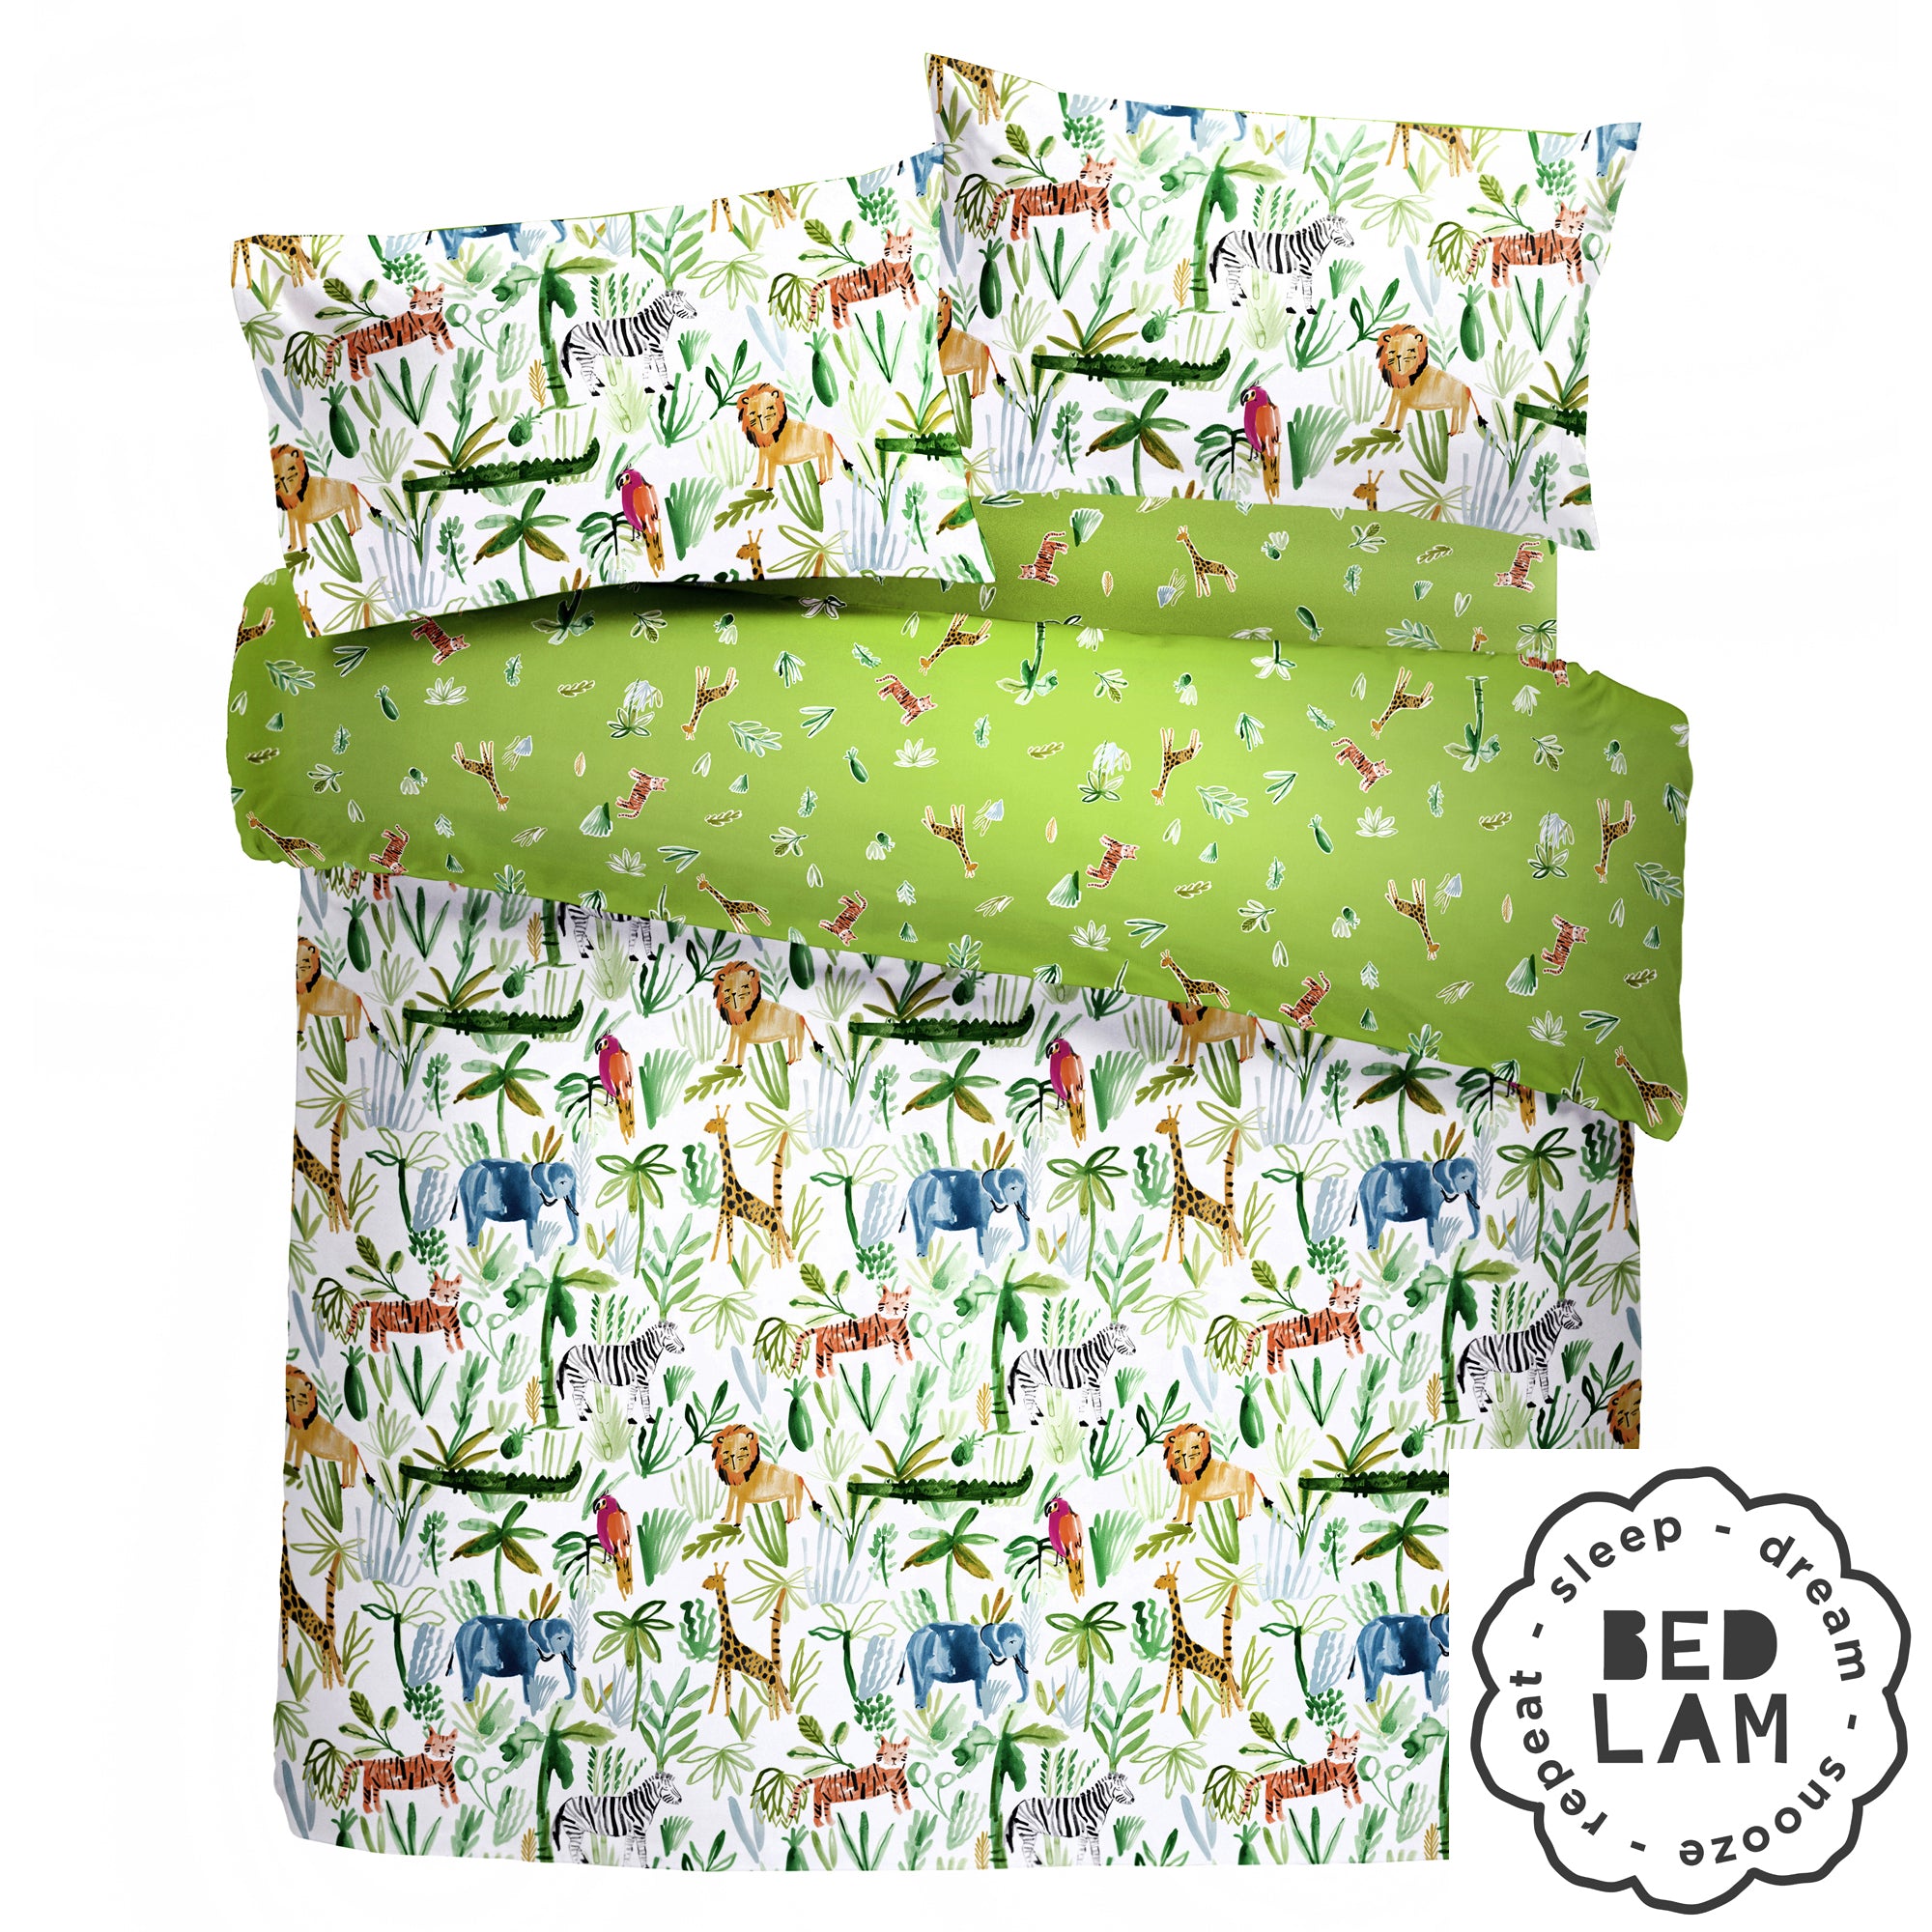 Jungle - Children's Duvet Cover Set, Curtains & Fitted Sheets - by Bedlam